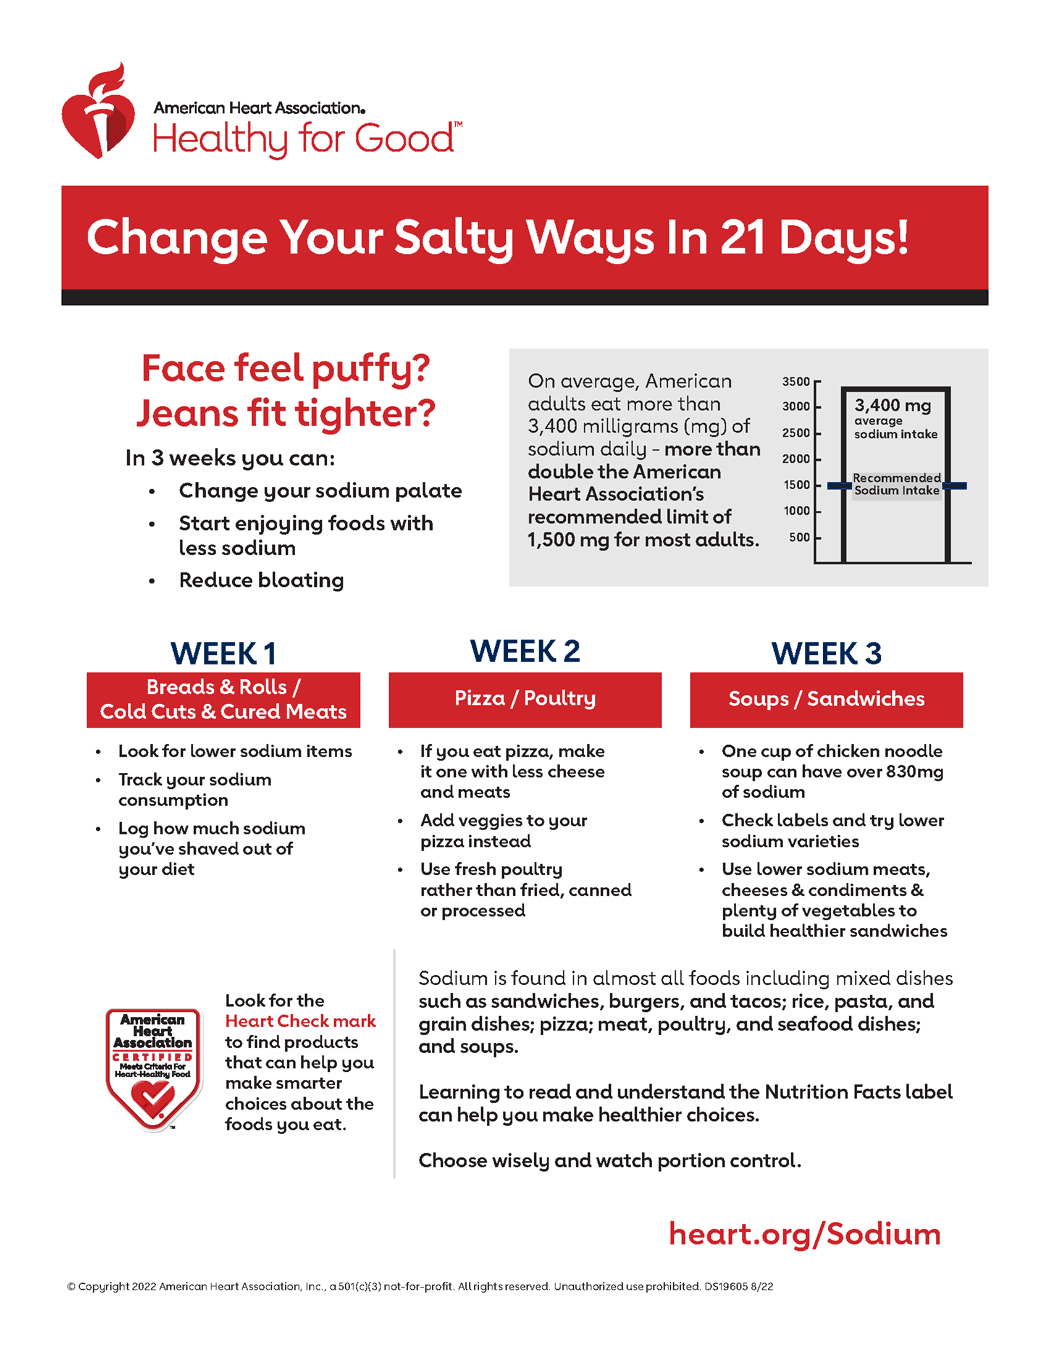 https://www.heart.org/-/media/AHA/H4GM/Infographics/Sodium-Swap-Change-Salty-Ways-infographic.png